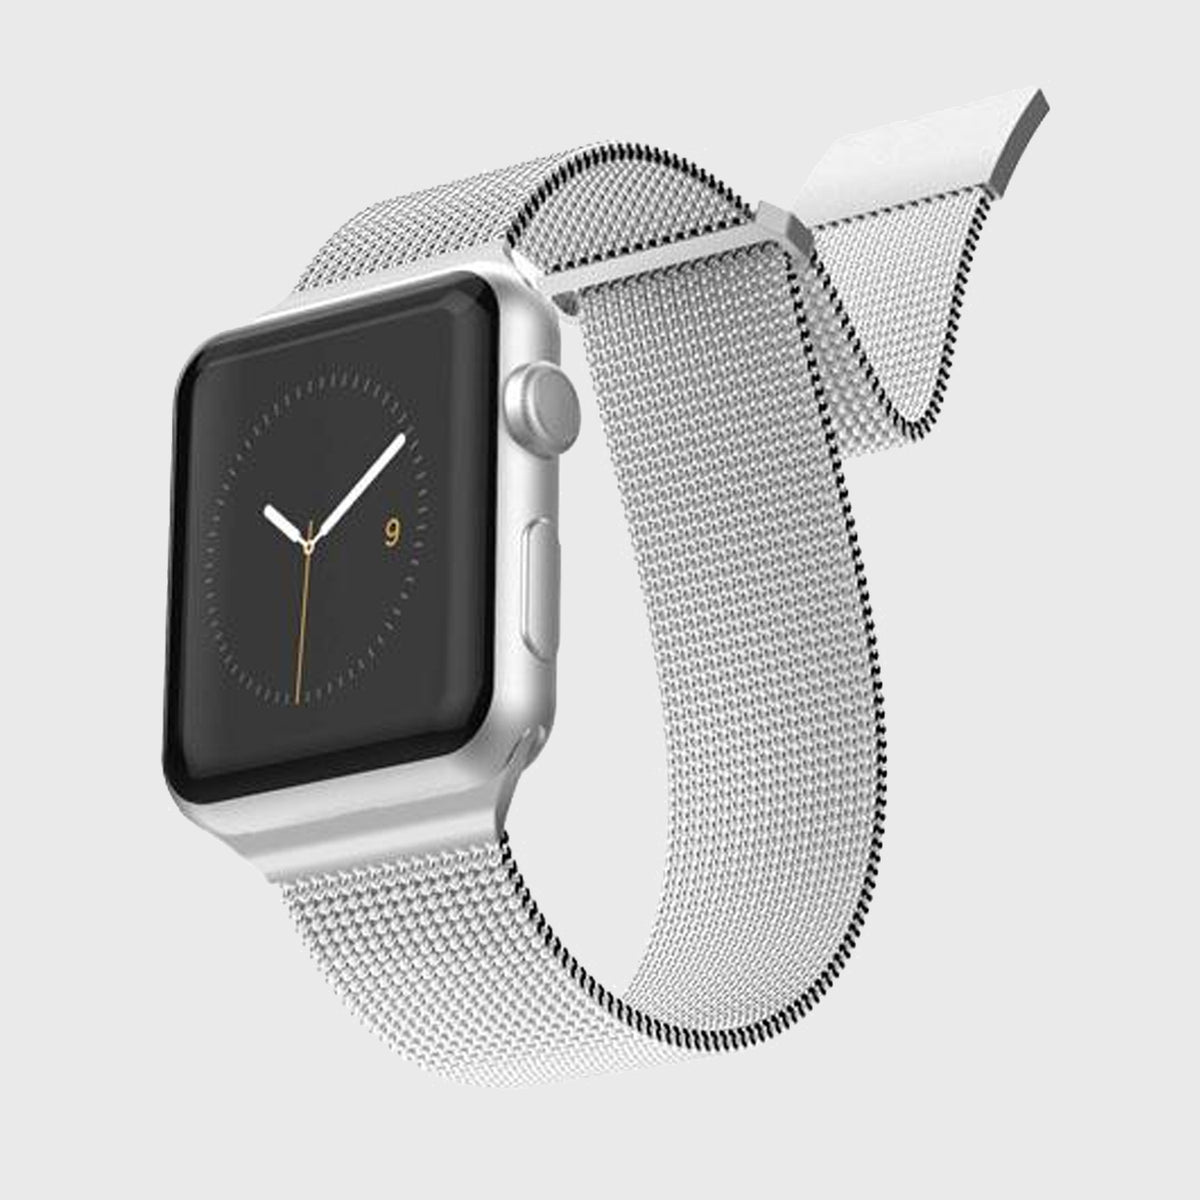 A stainless steel Raptic Apple Watch with a Mesh Band strap.